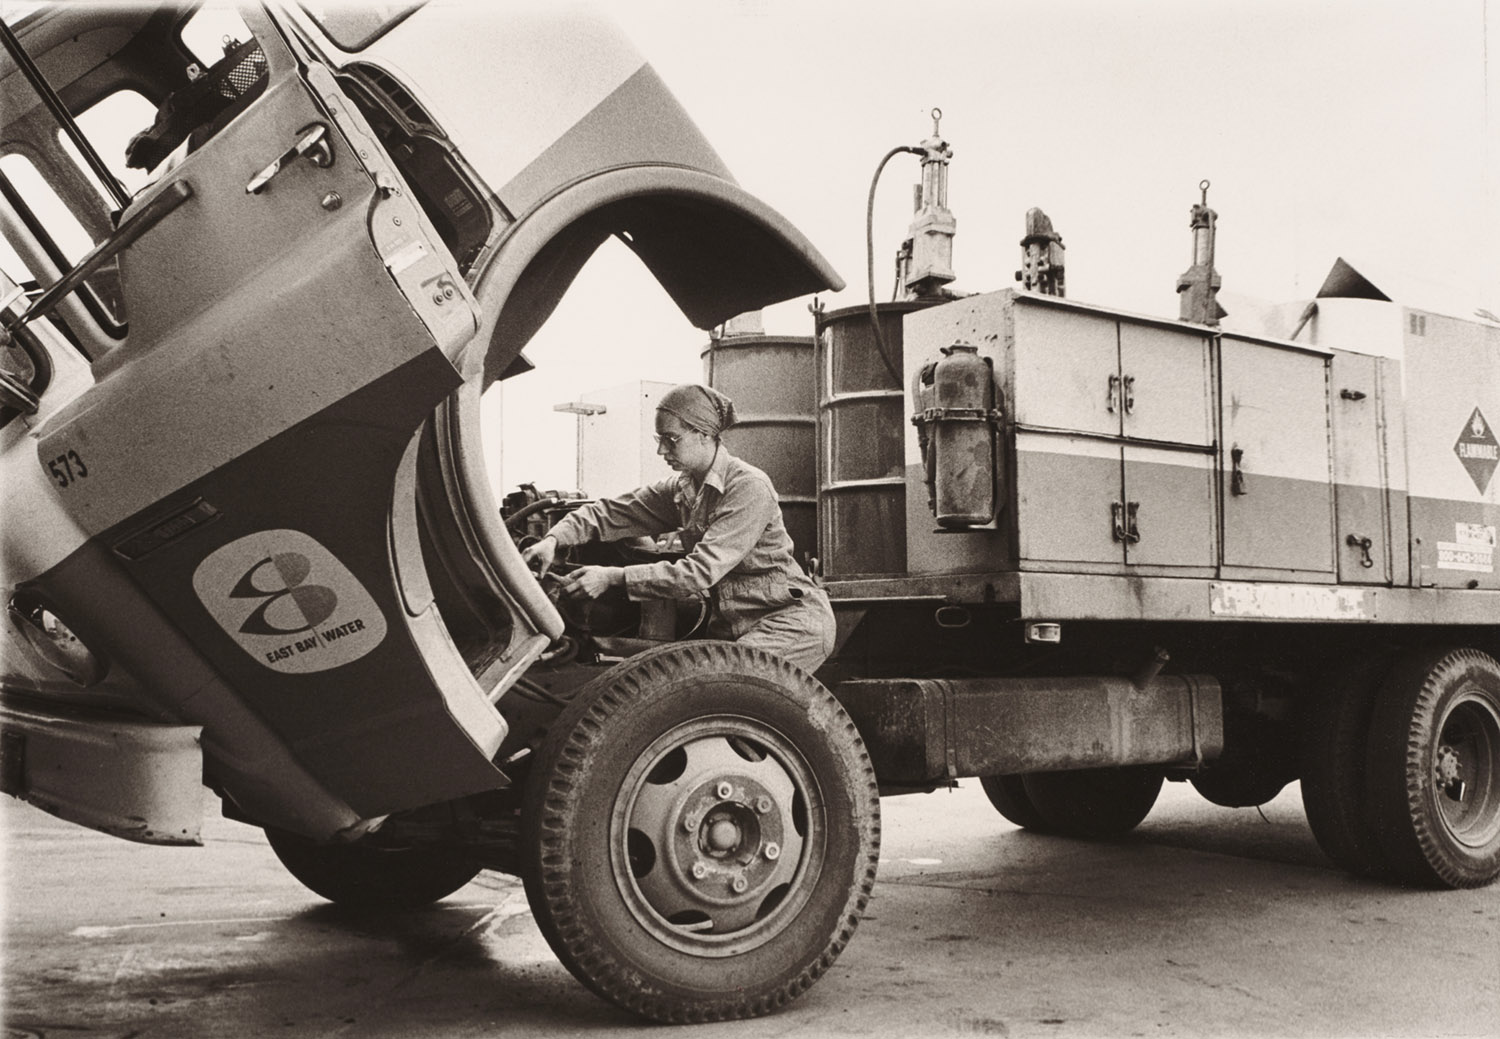 Woman working on a truck engine